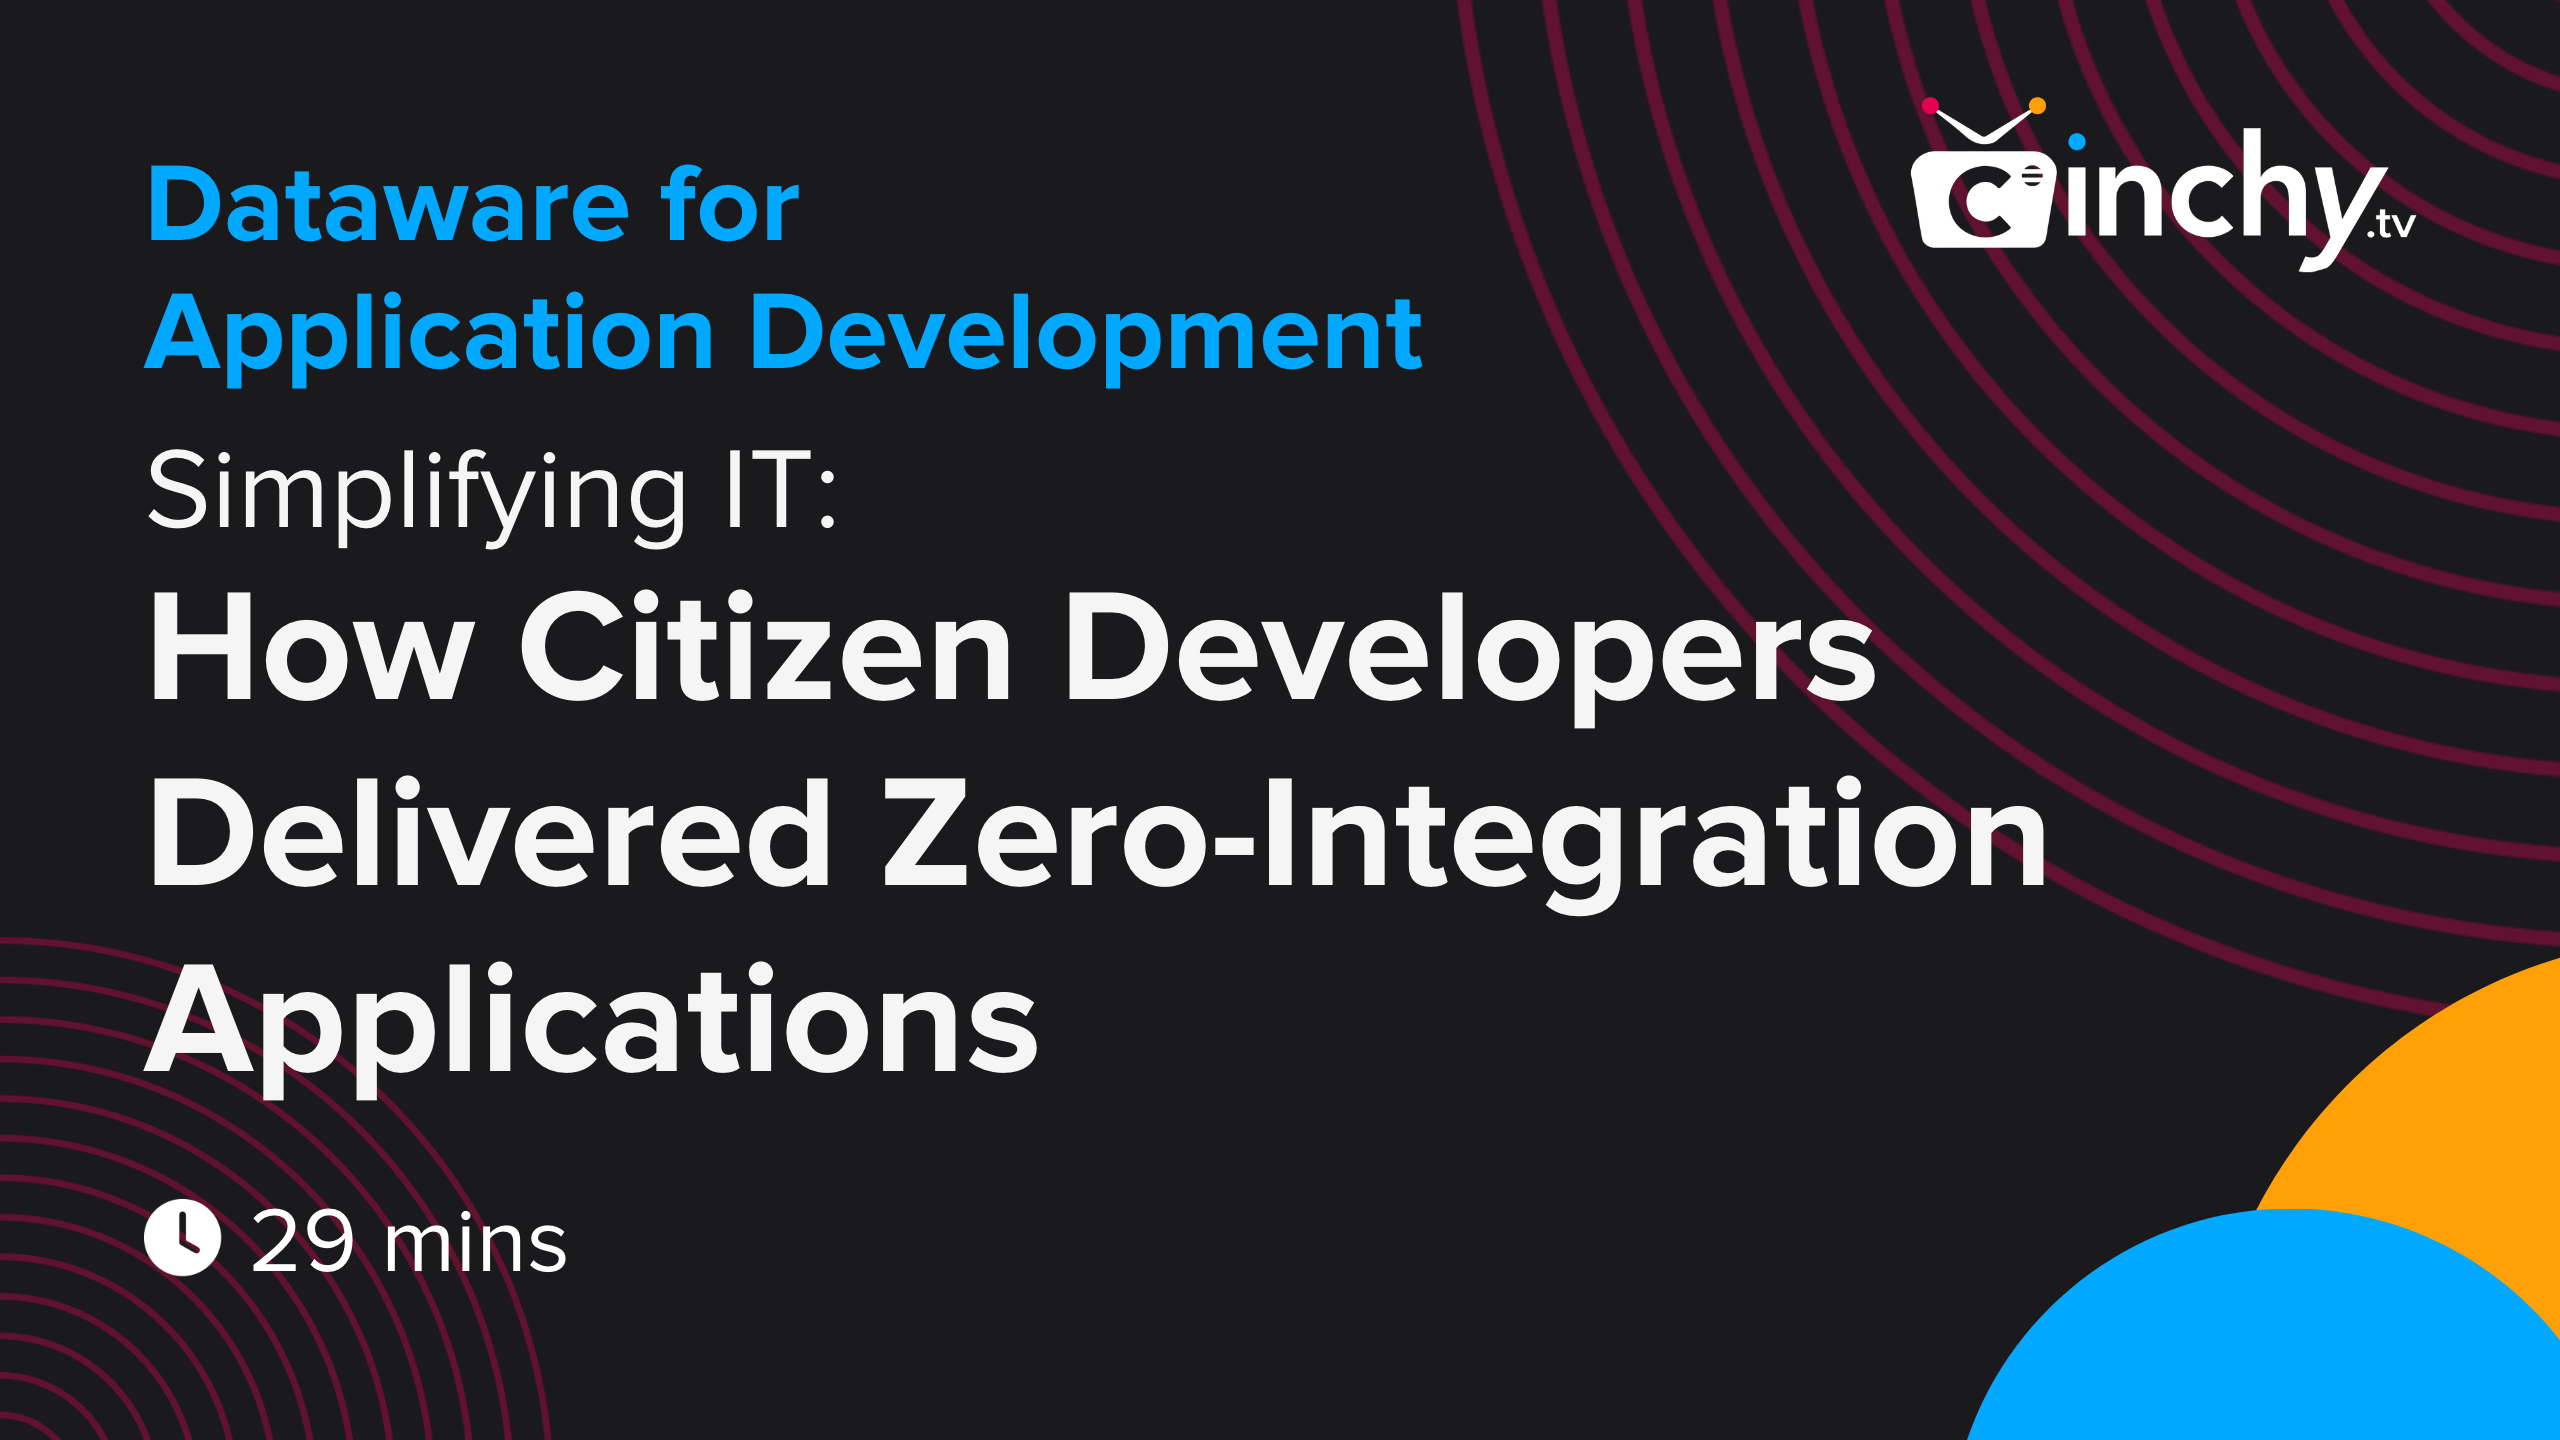 Simplifying IT: How Citizen Developers Delivered Zero-Integration Applications